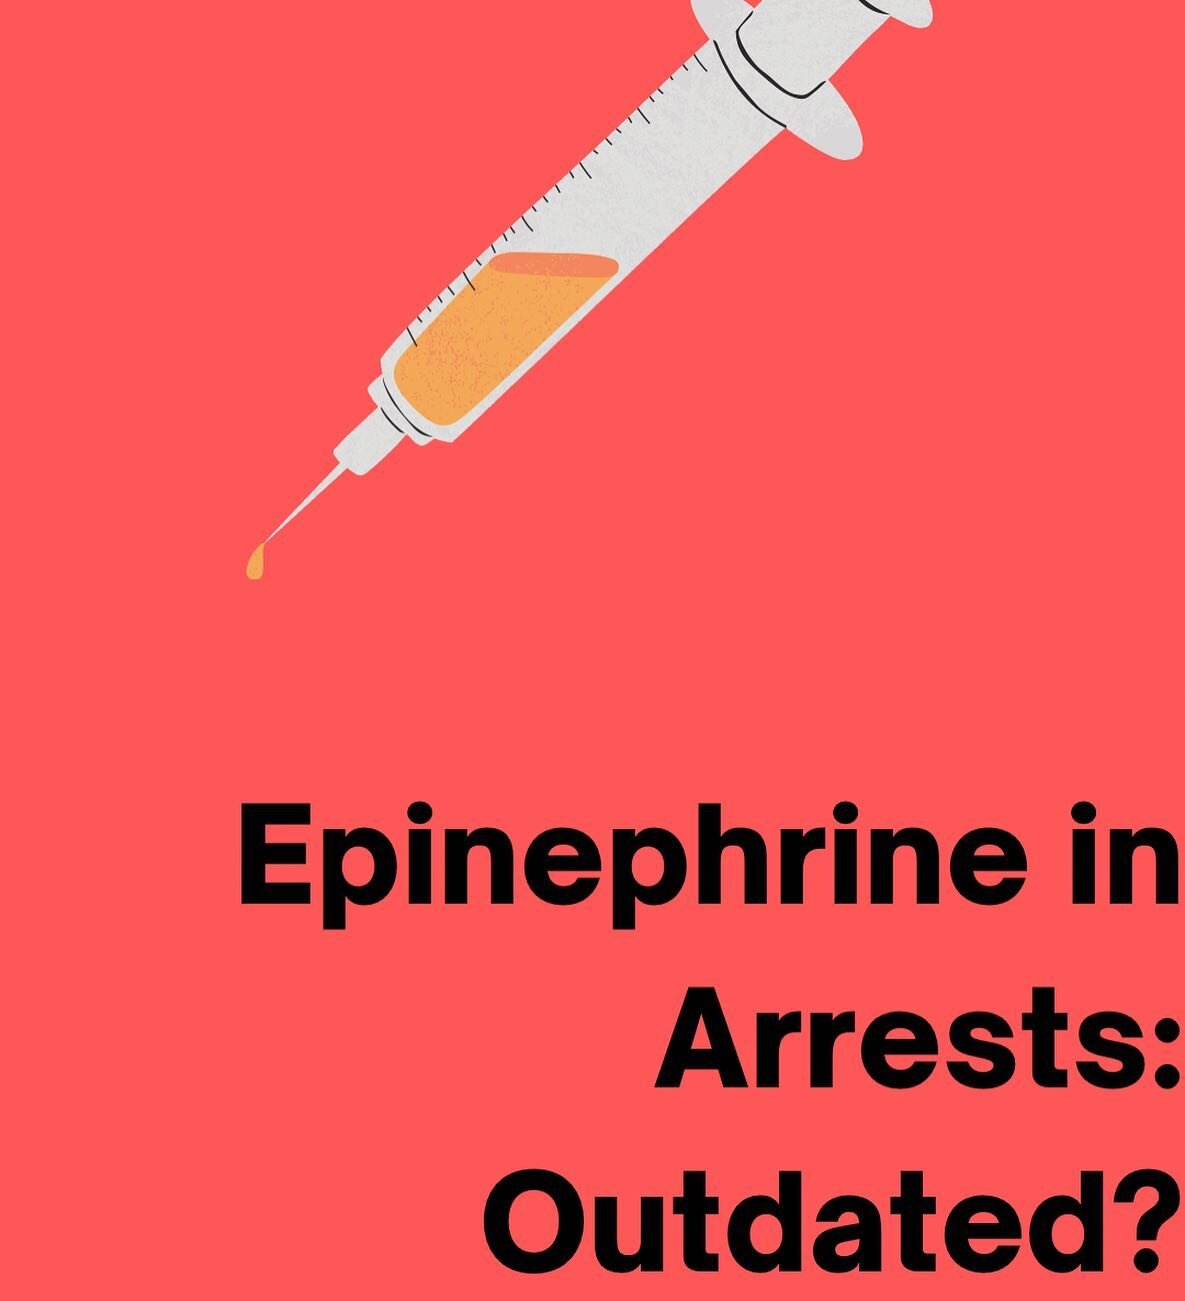 Epinephrine: Outdated? 💉💘

Background: Since the 2018 release of the UK-based PARAMEDIC2 trial, epinephrine&rsquo;s role in cardiac arrest and ACLS care has been hotly debated. The PARAMEDIC2 trial was an interventional study that assessed the 30 d